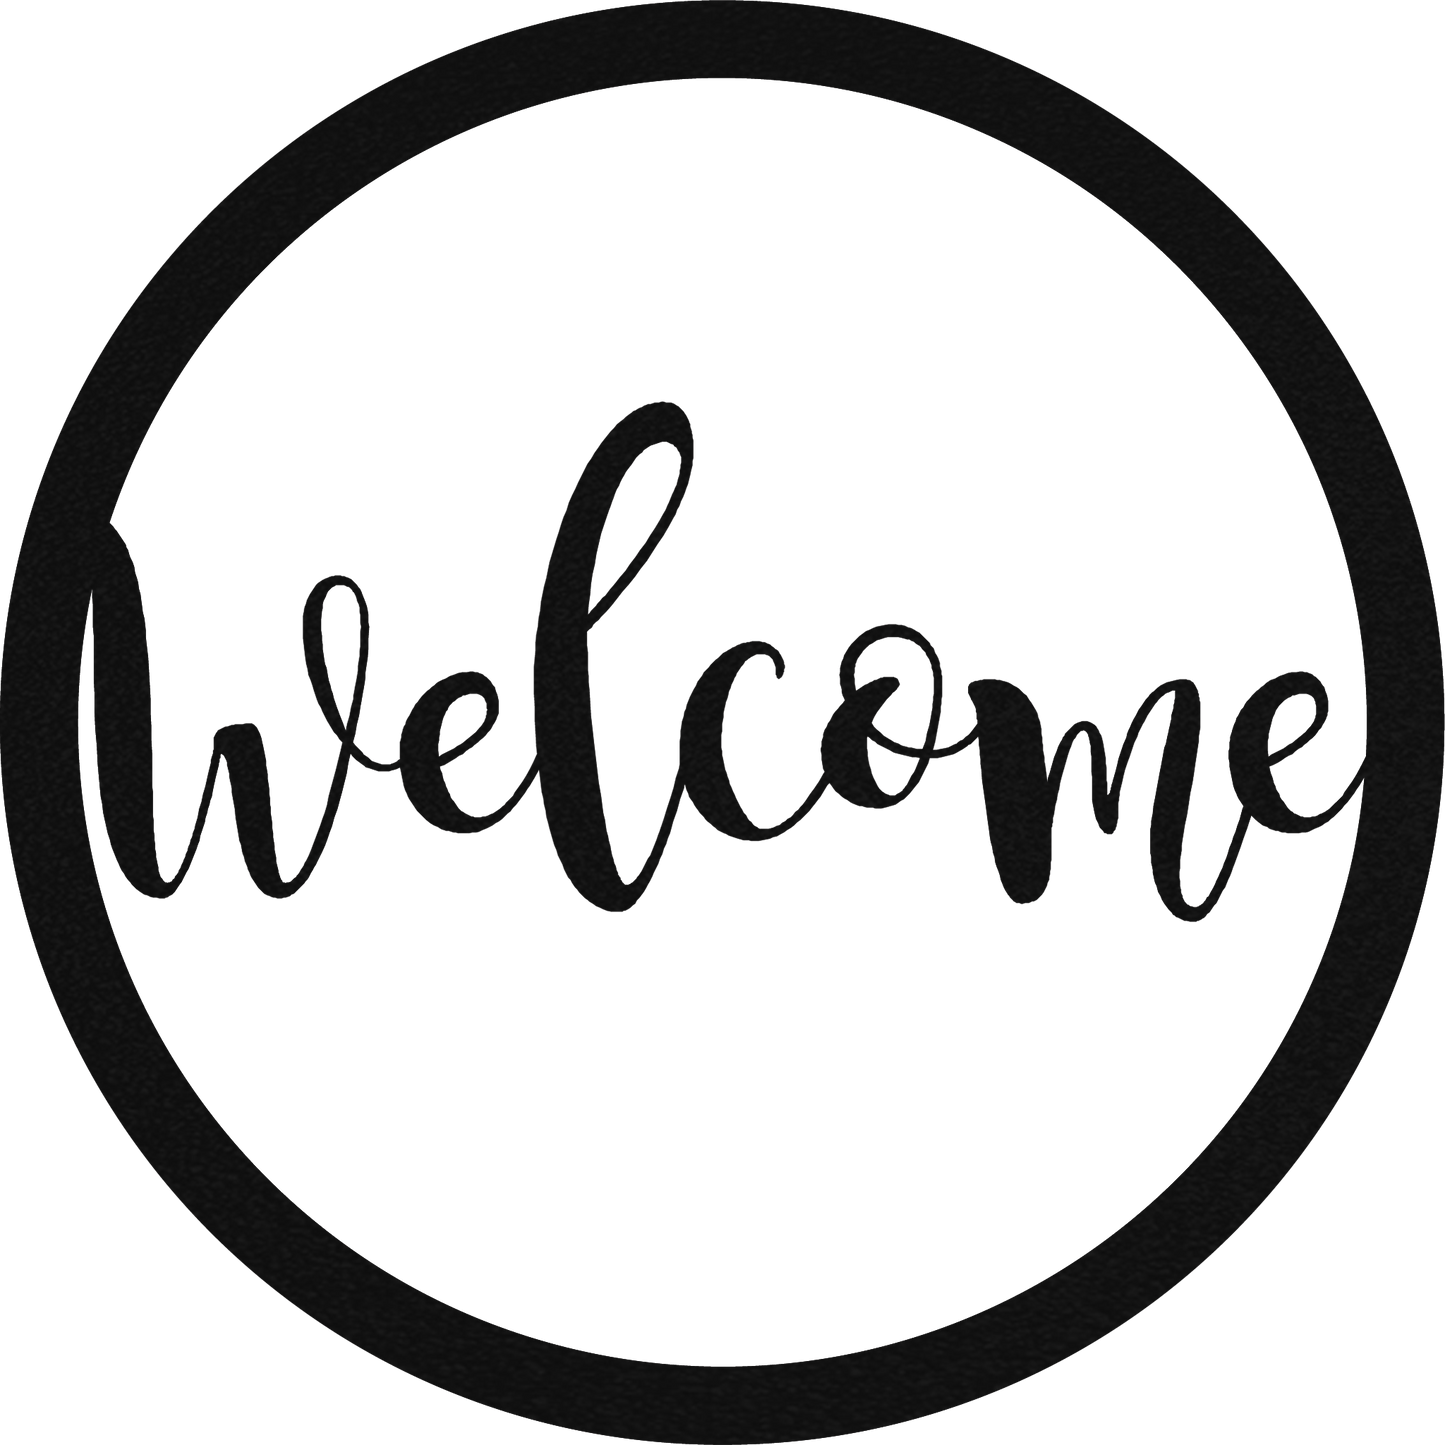 Welcome Round Sign - Metal Wall Art - Badger Steel USA